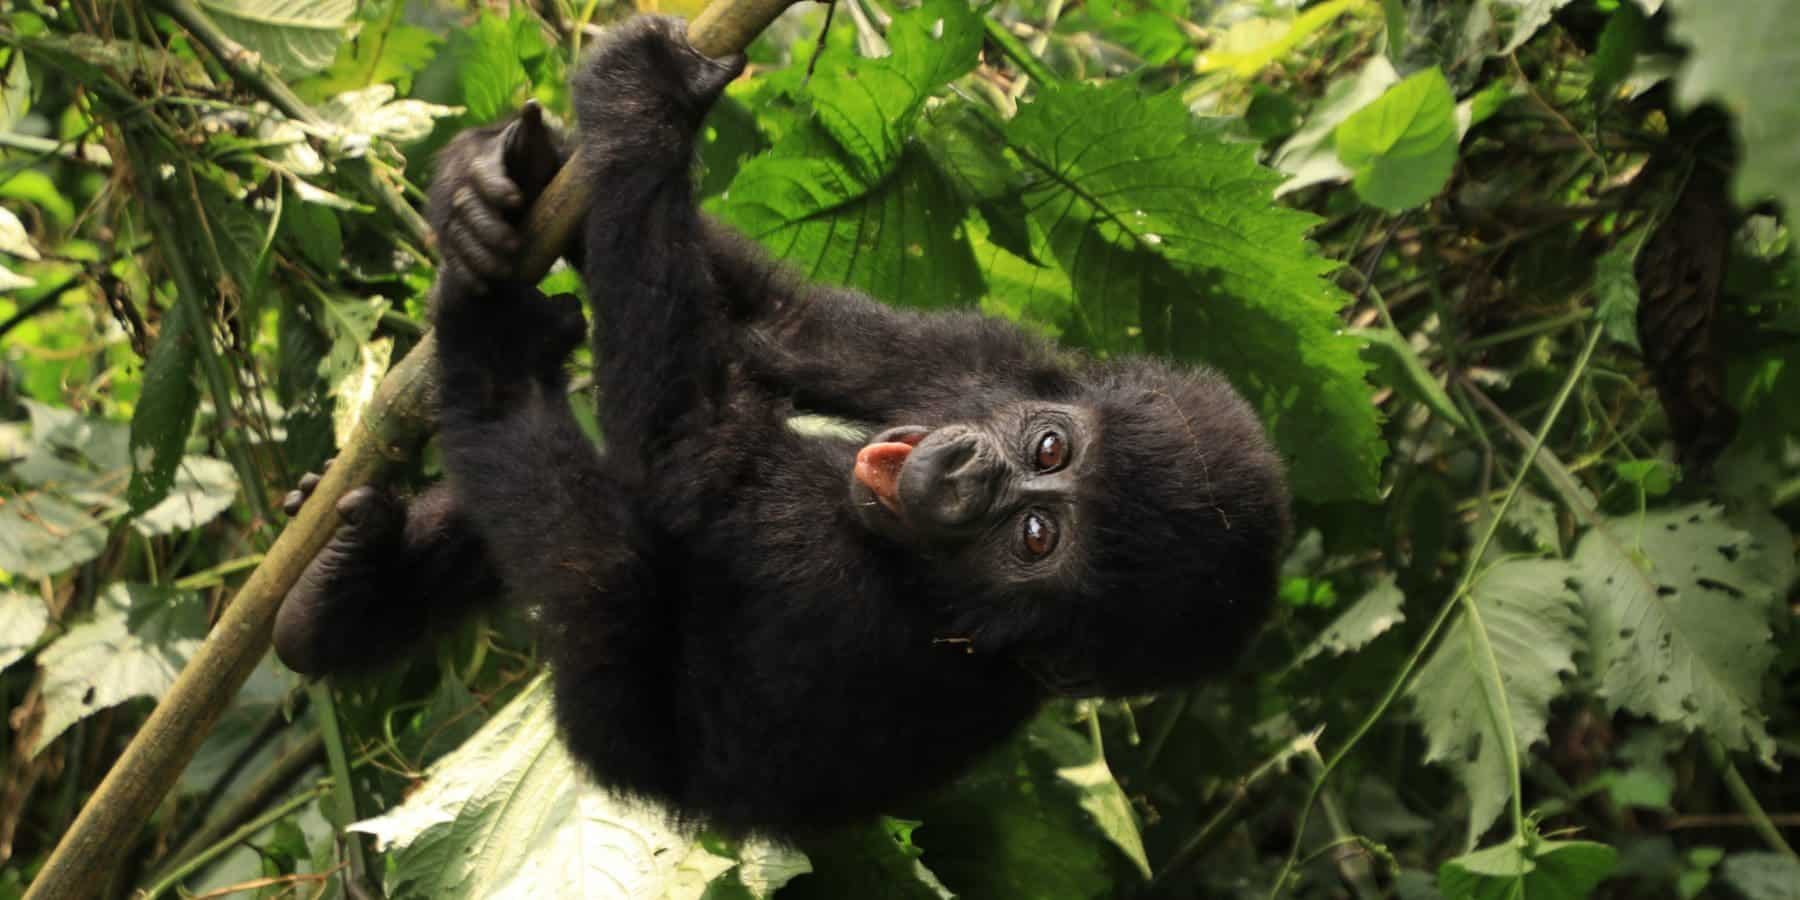 Experience the Lifechanging Adventure of Gorilla Trekking in Africa (Yes, It’s Safe and Ethical!)